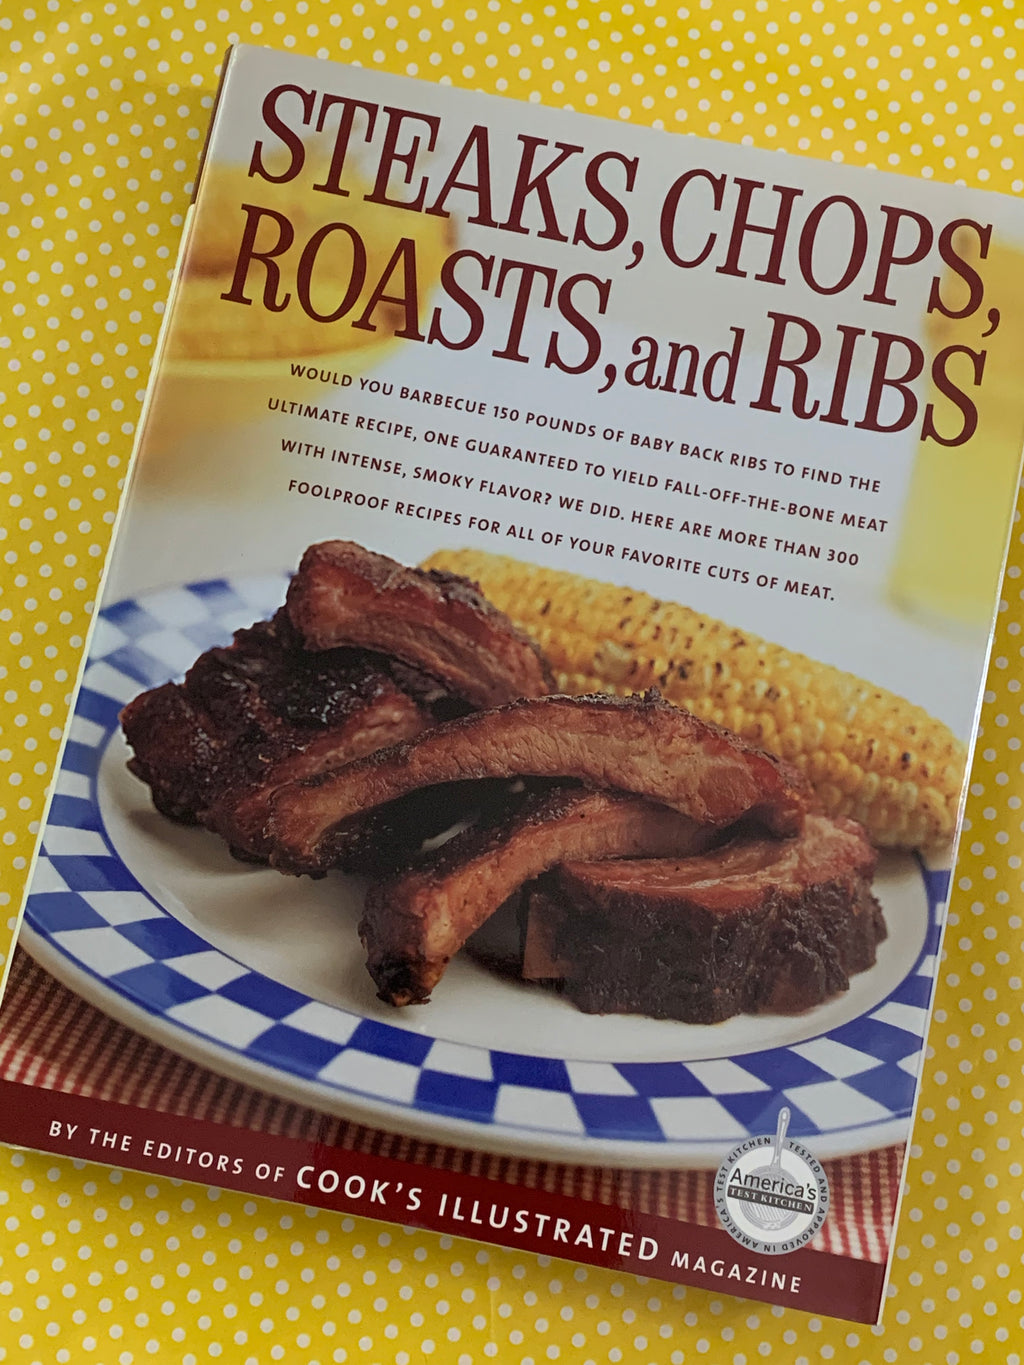 Steaks, Chops, Roasts, and Ribs- By the Editors of Cook's Illustrated